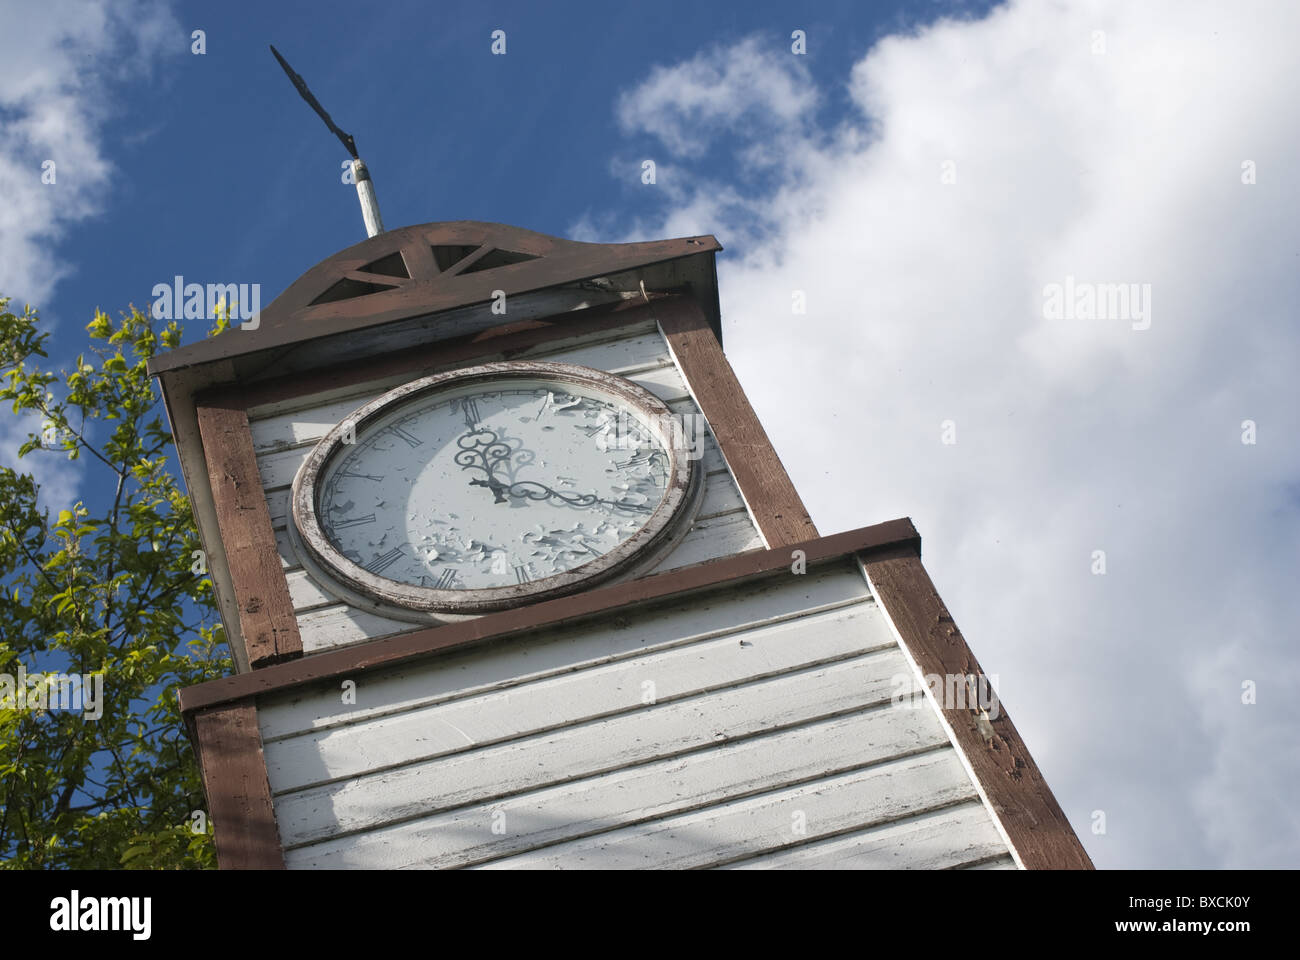 A traditional clock tower in Kukkolankoski, Finnish Lapland. The clock was used to signal whitefish fishing activities. Stock Photo